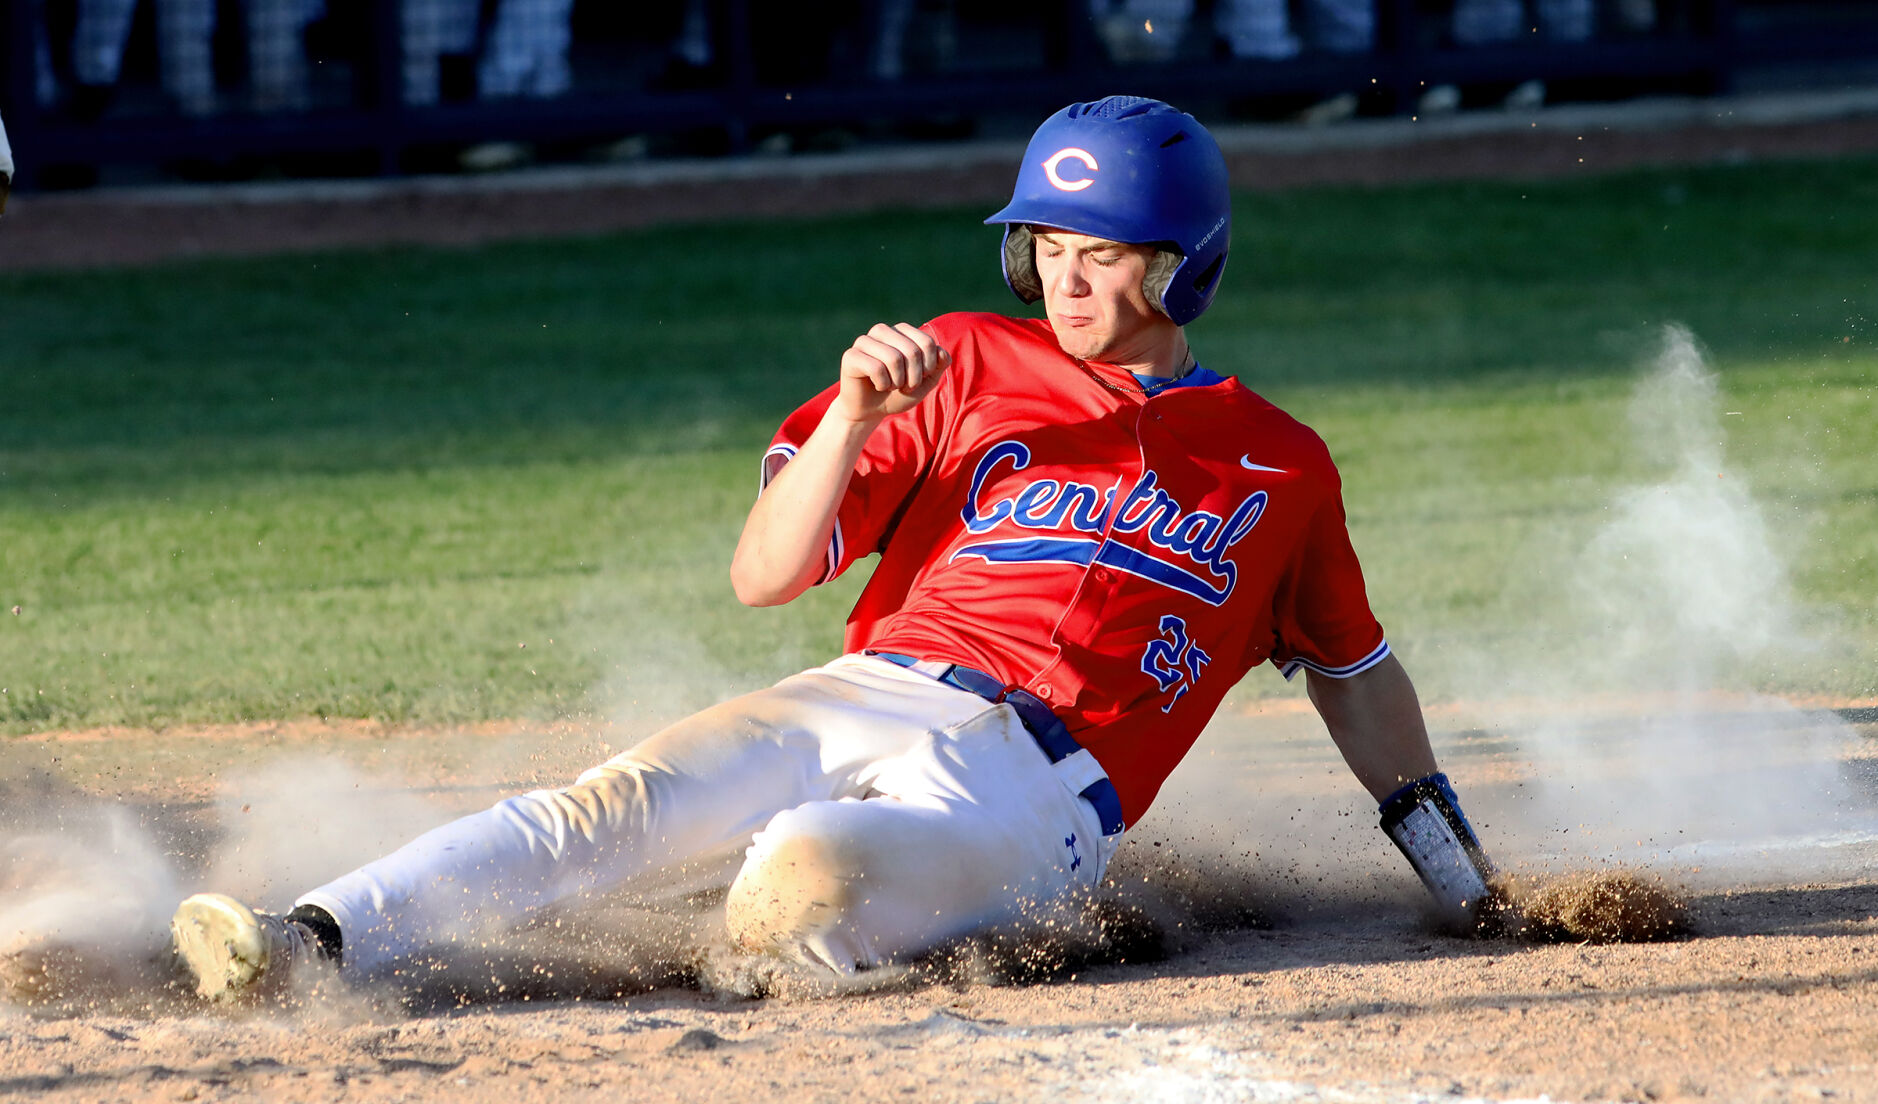 44TH DISTRICT BASEBALL: Indians claim another title with ‘get back’ win